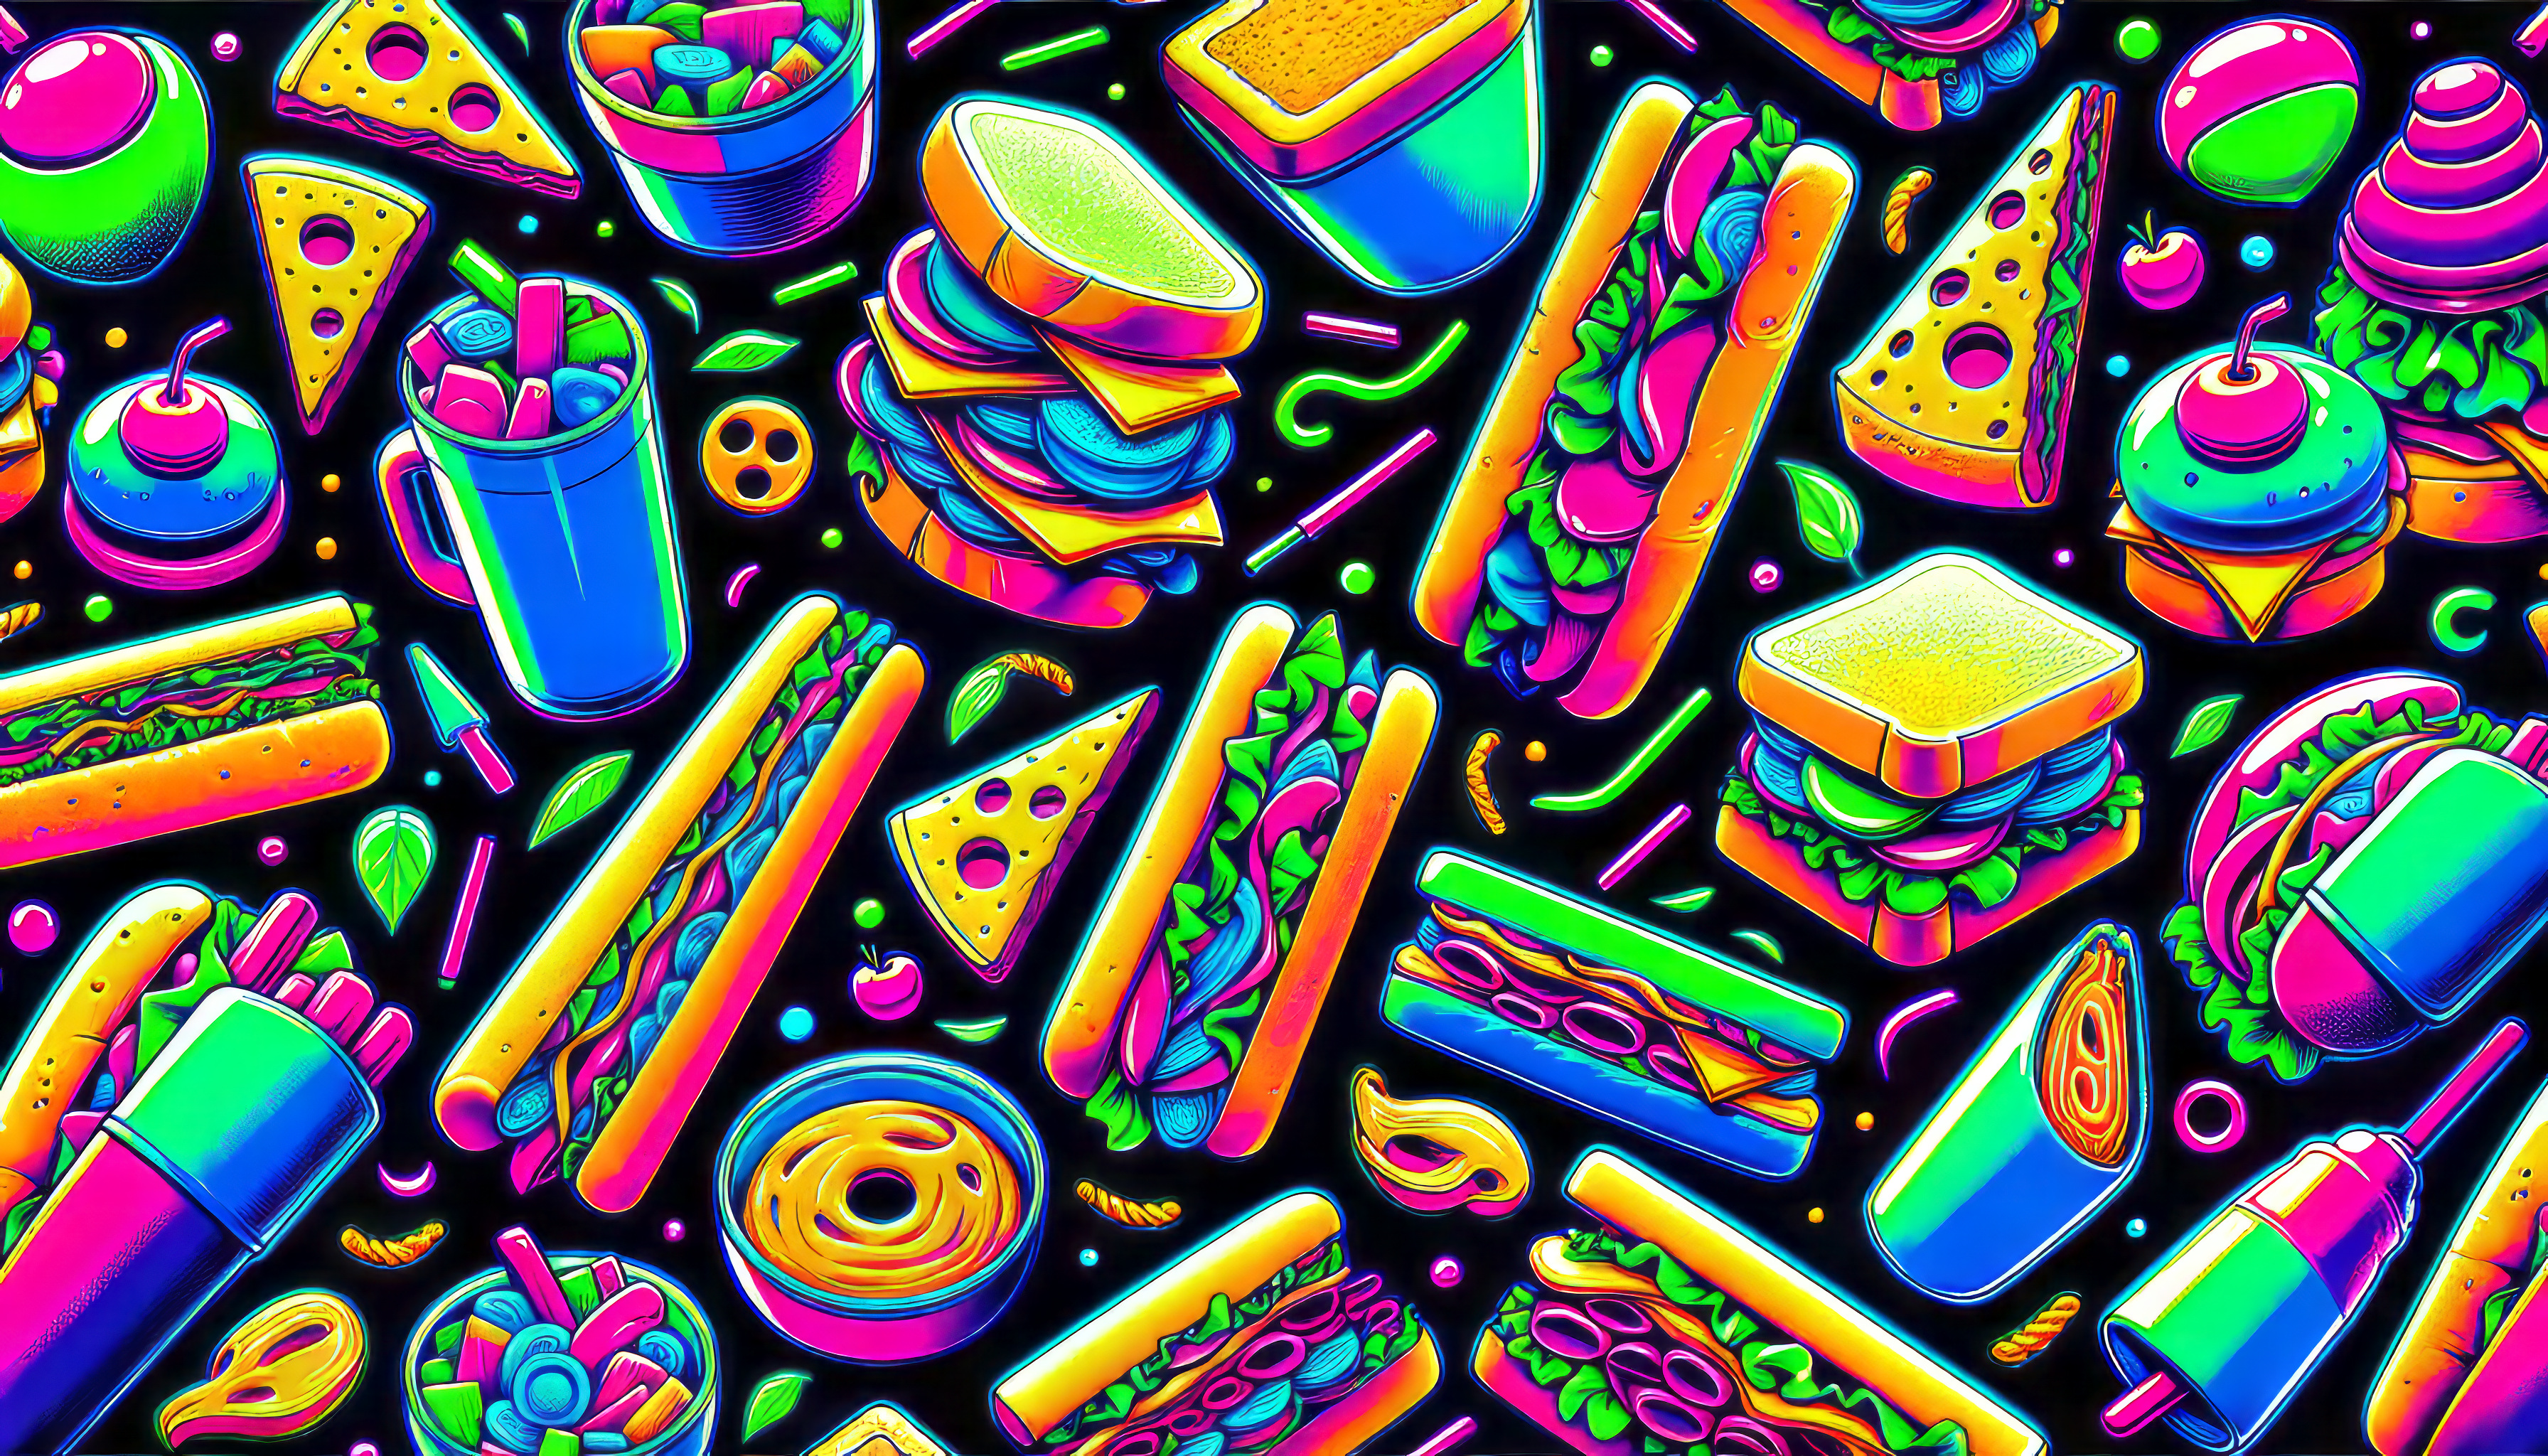 Colorful illustrated sandwich and fast food pattern HD desktop wallpaper.